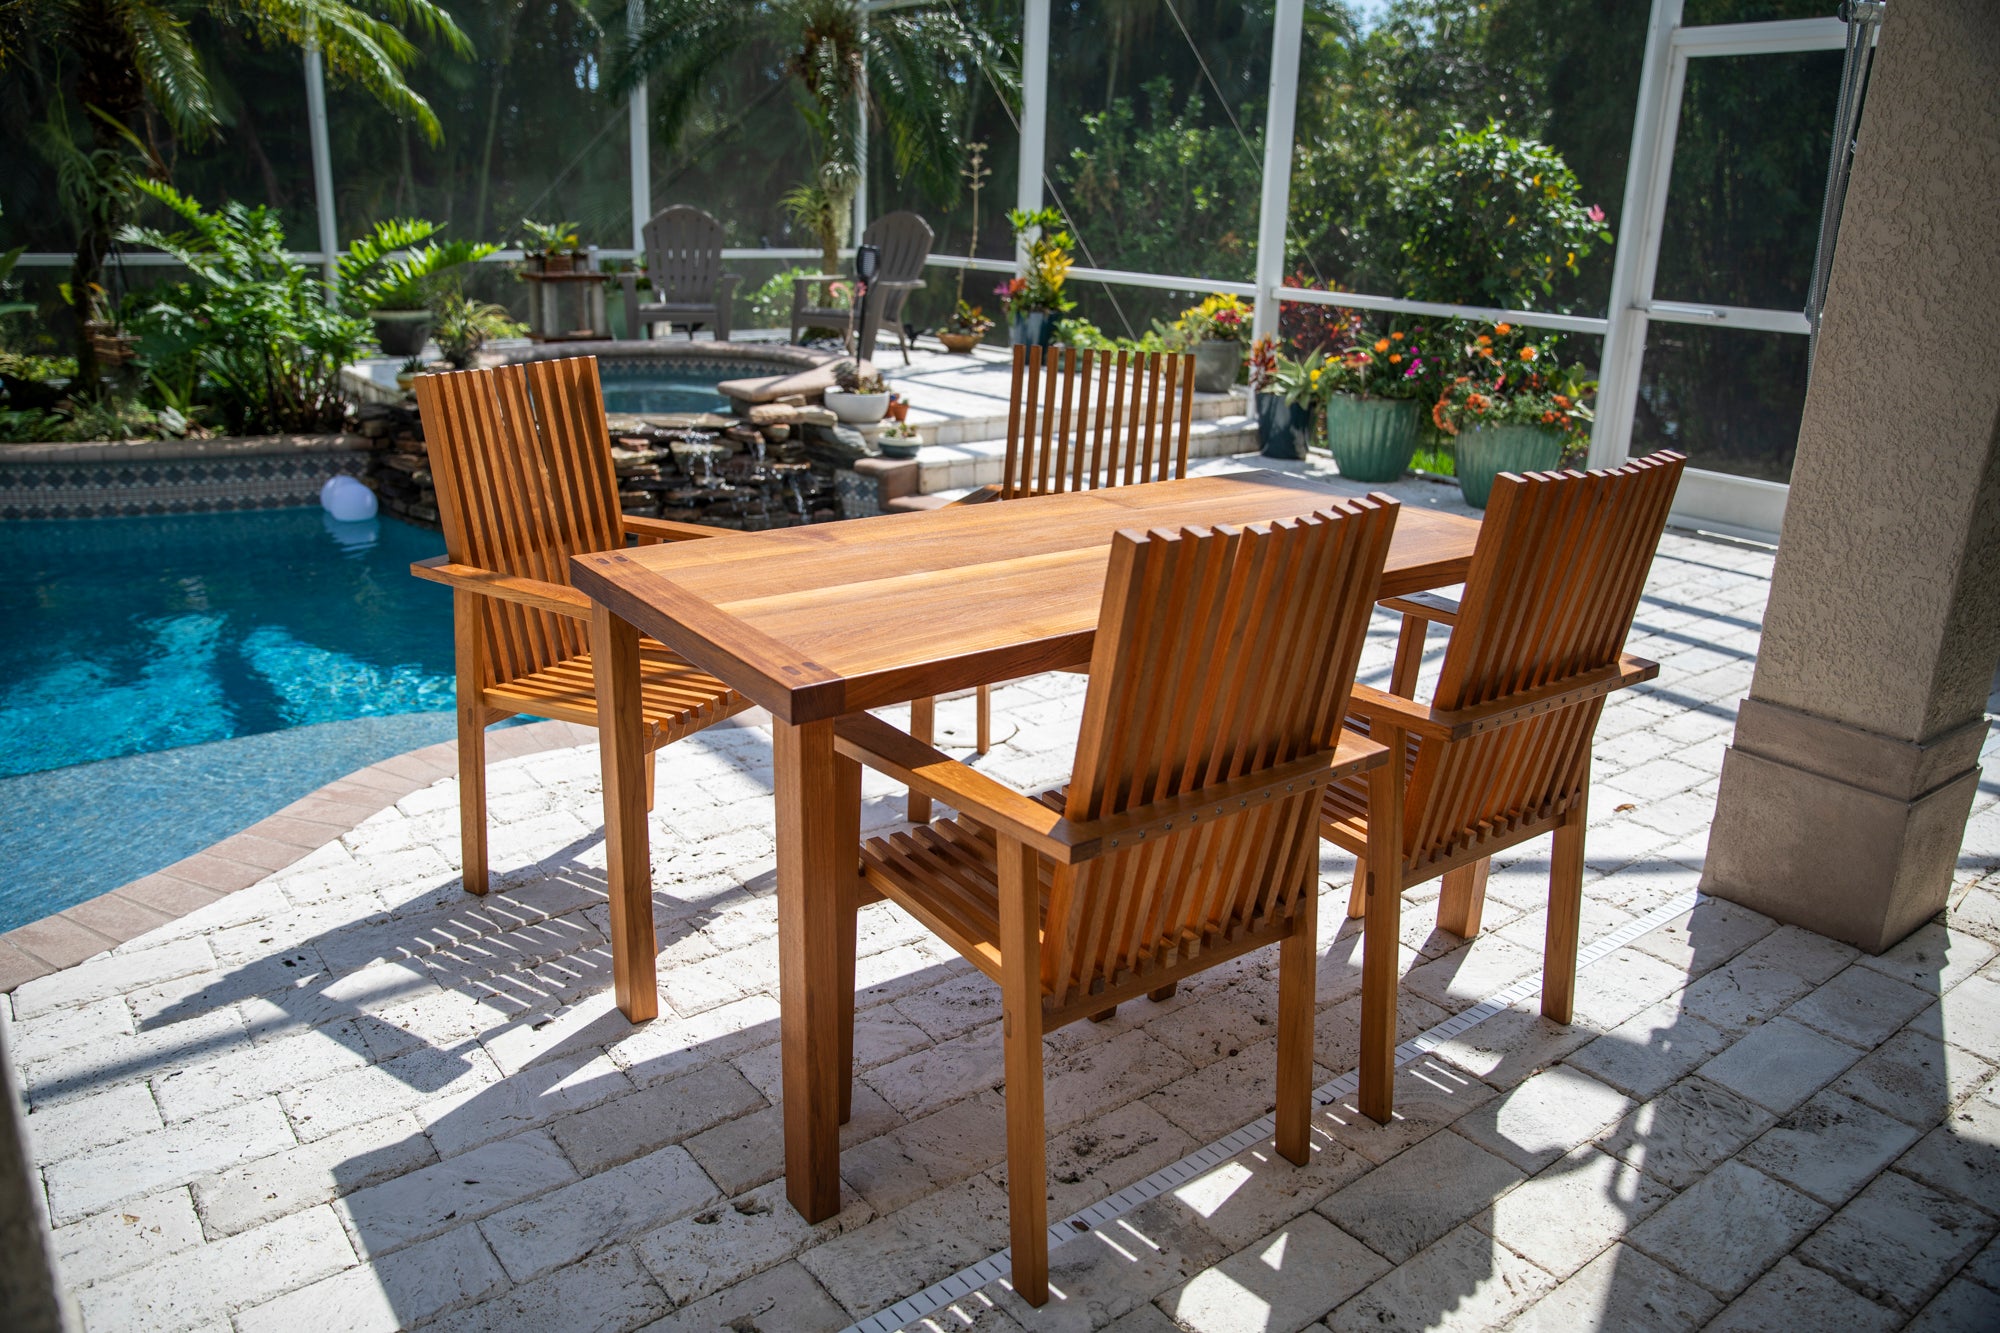 The Teak Outdoor Dining Set, A Table and Four Chairs